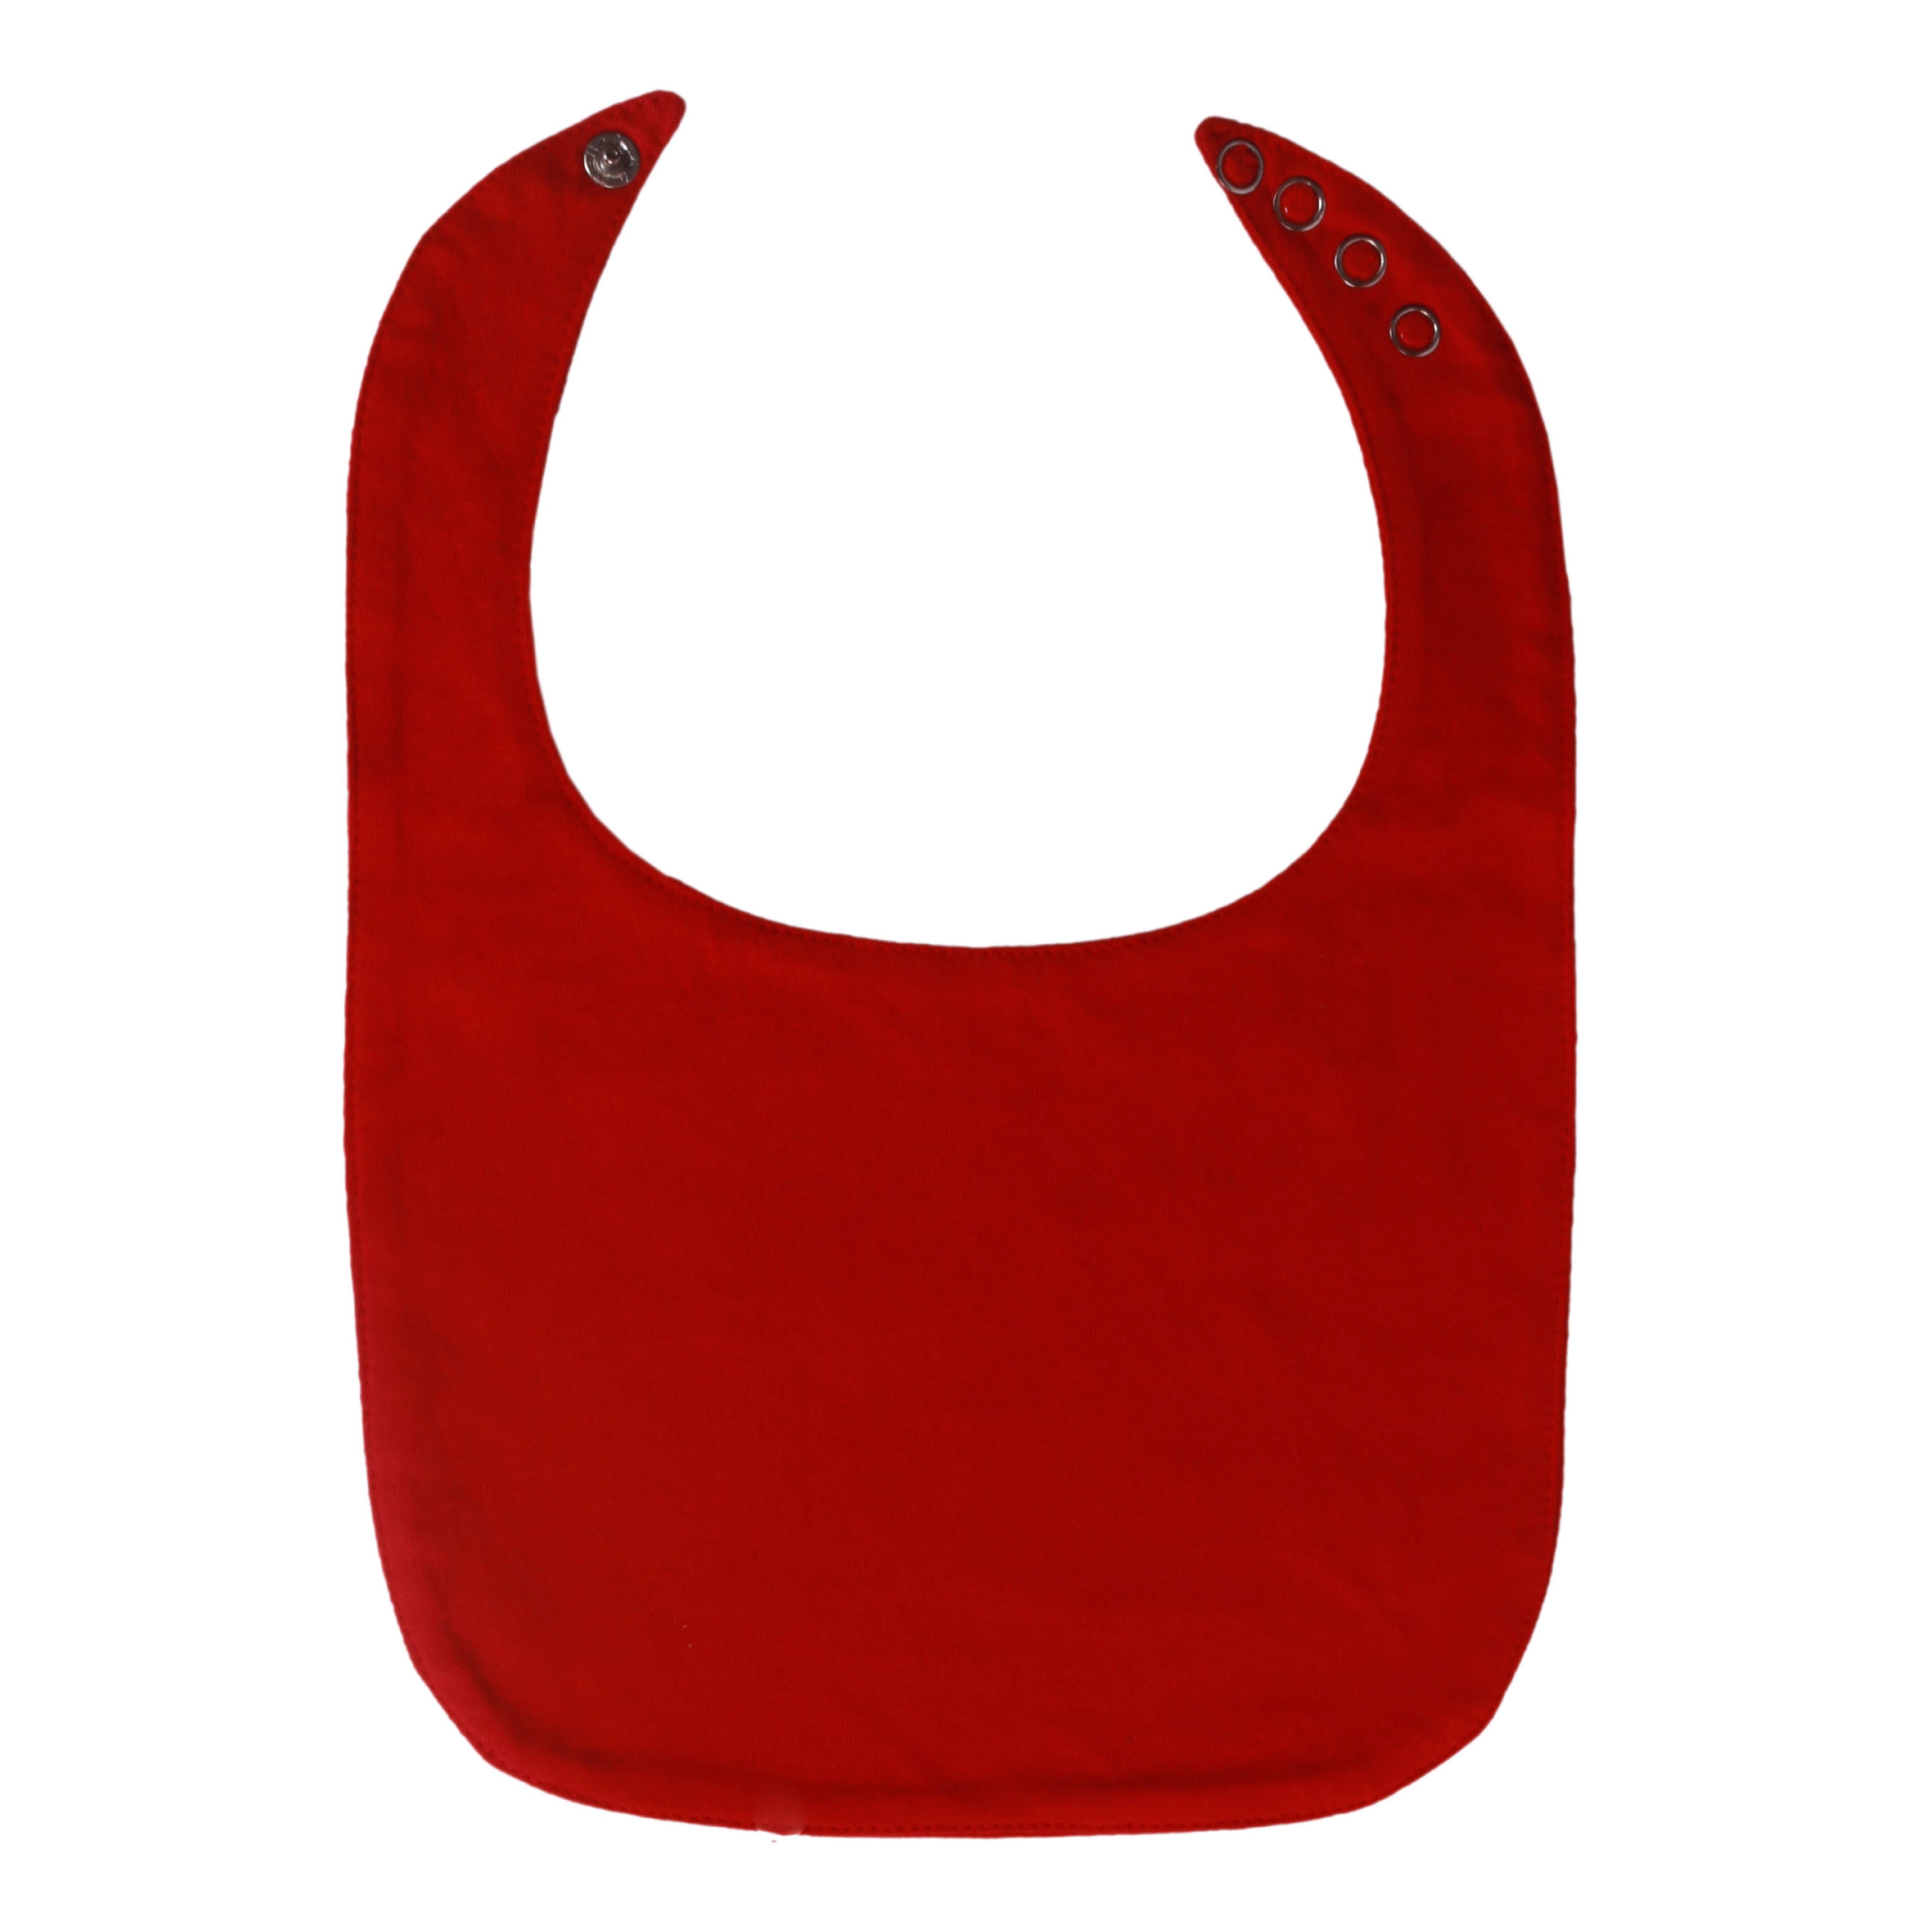 Little By Little 100% Anti Viral, Cotton, Reusable, Anti bacterial & Water Repellent Baby Bibs, Booties, Mittens - Red